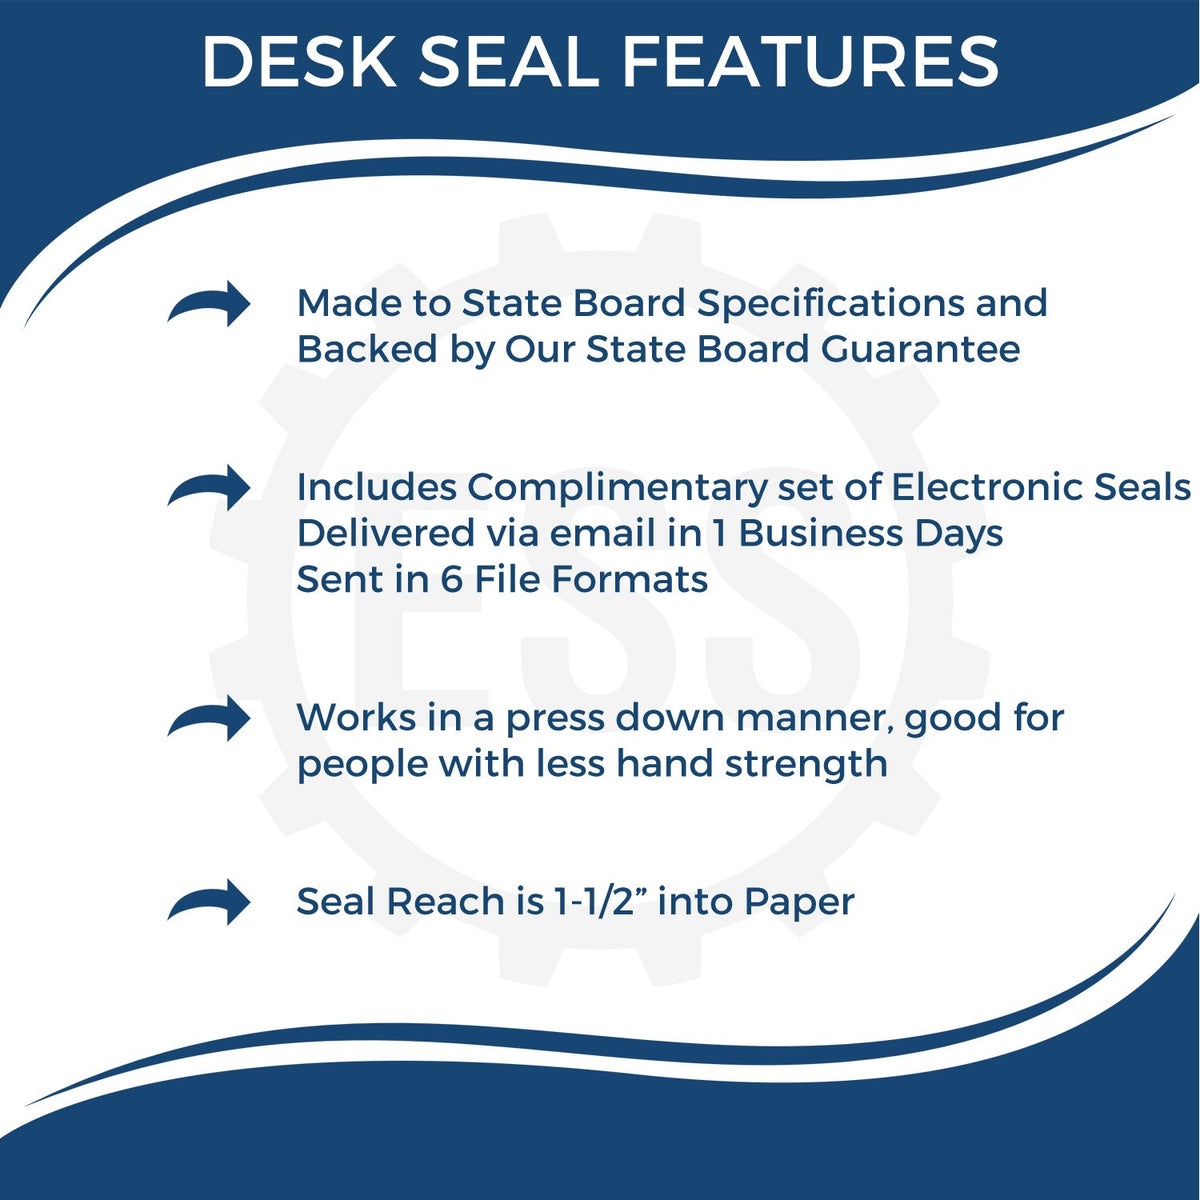 A picture of an infographic highlighting the selling points for the Illinois Engineer Desk Seal